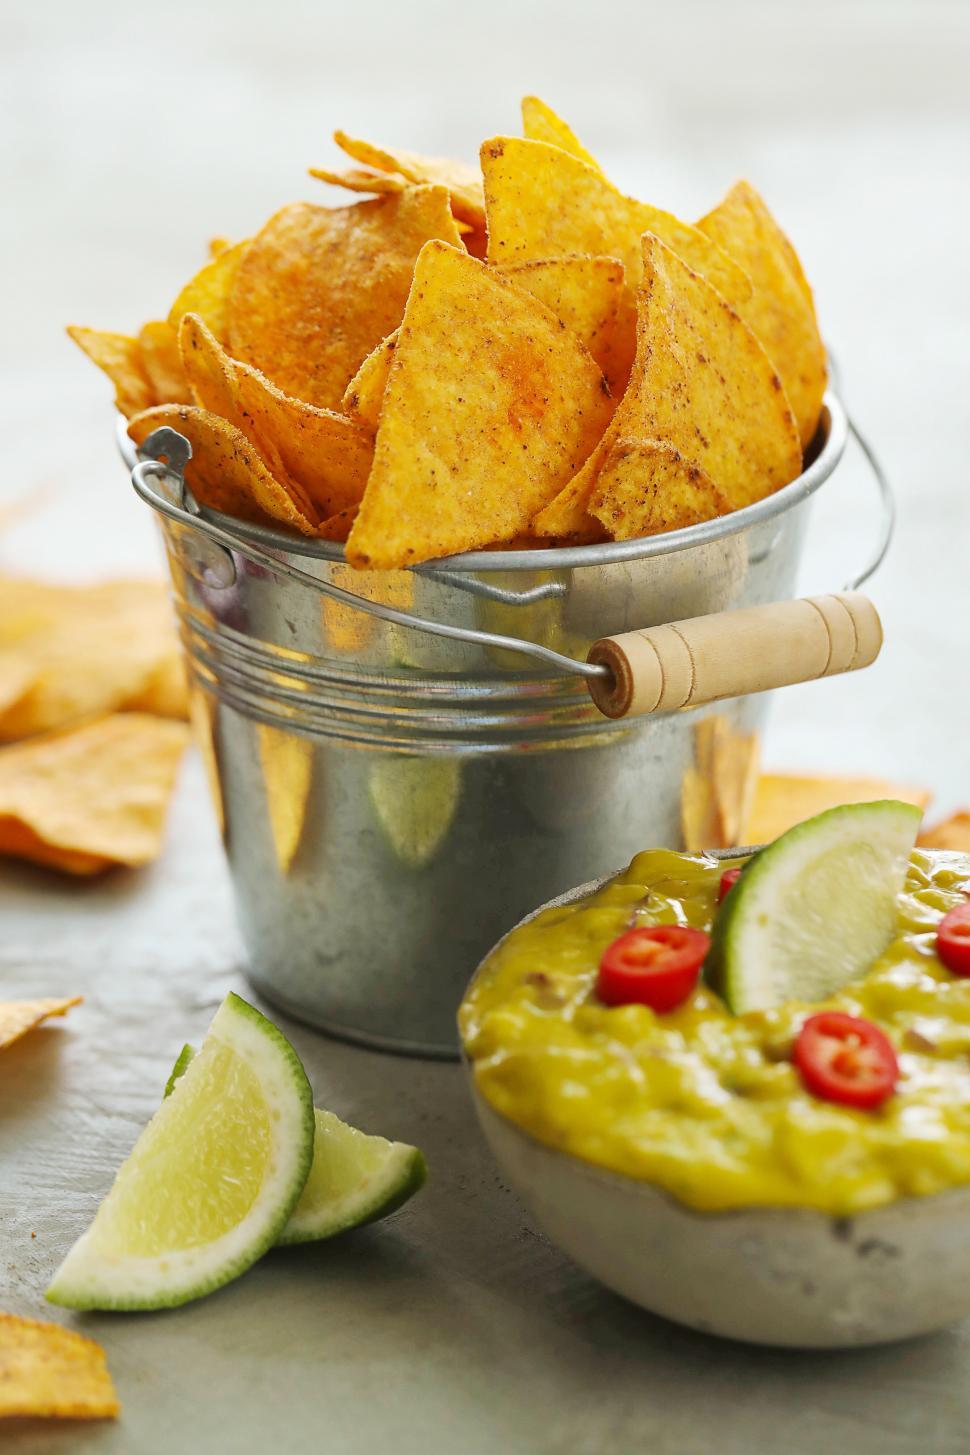 Free Image of Tortilla chips and guacamole  